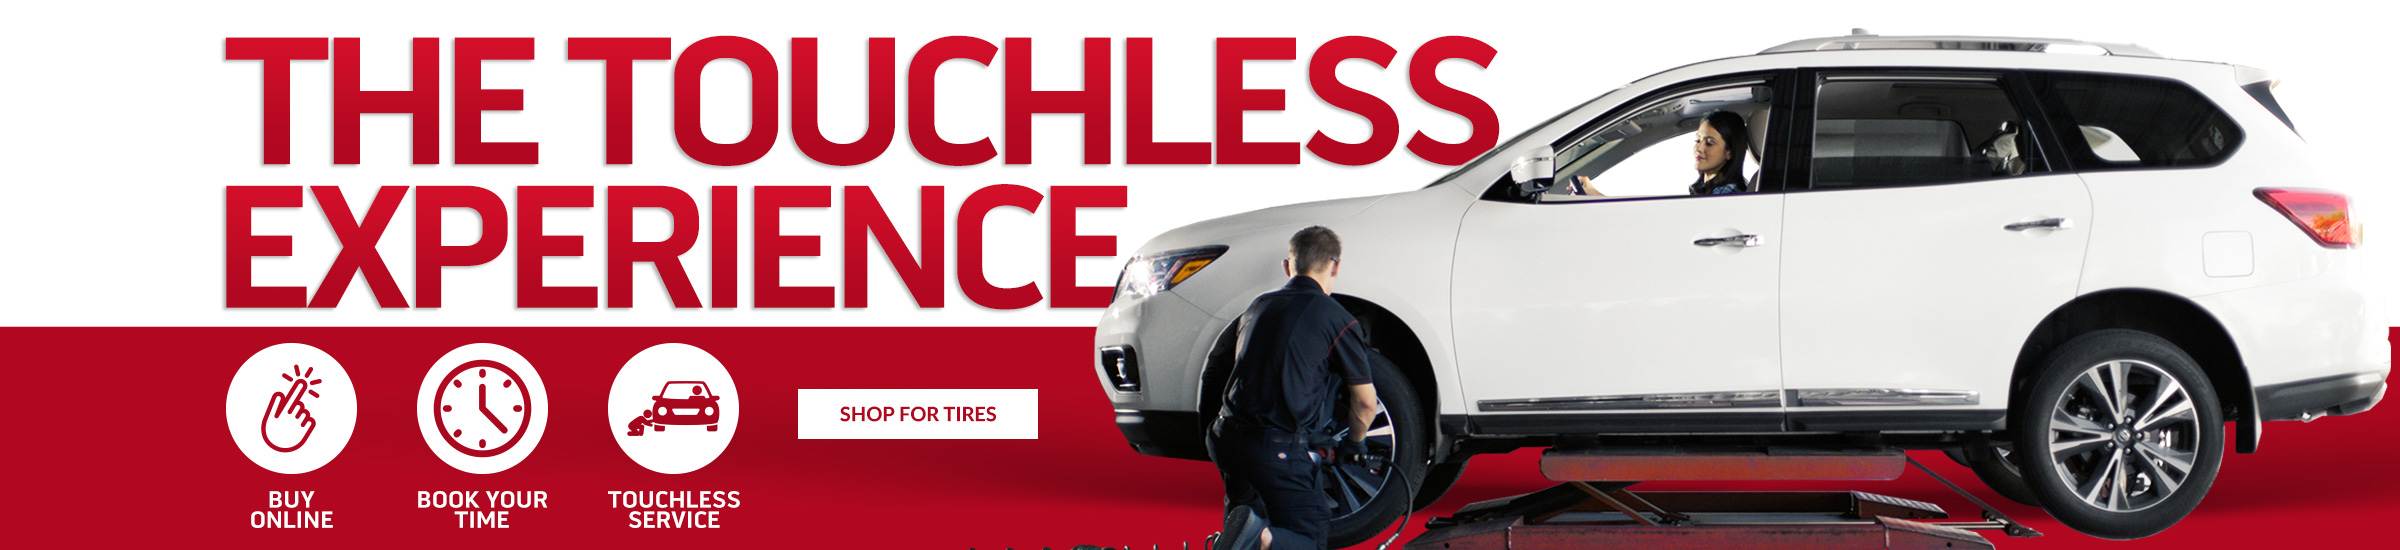 Discount Tire Tires Wheels For Sale Tire Repair Service